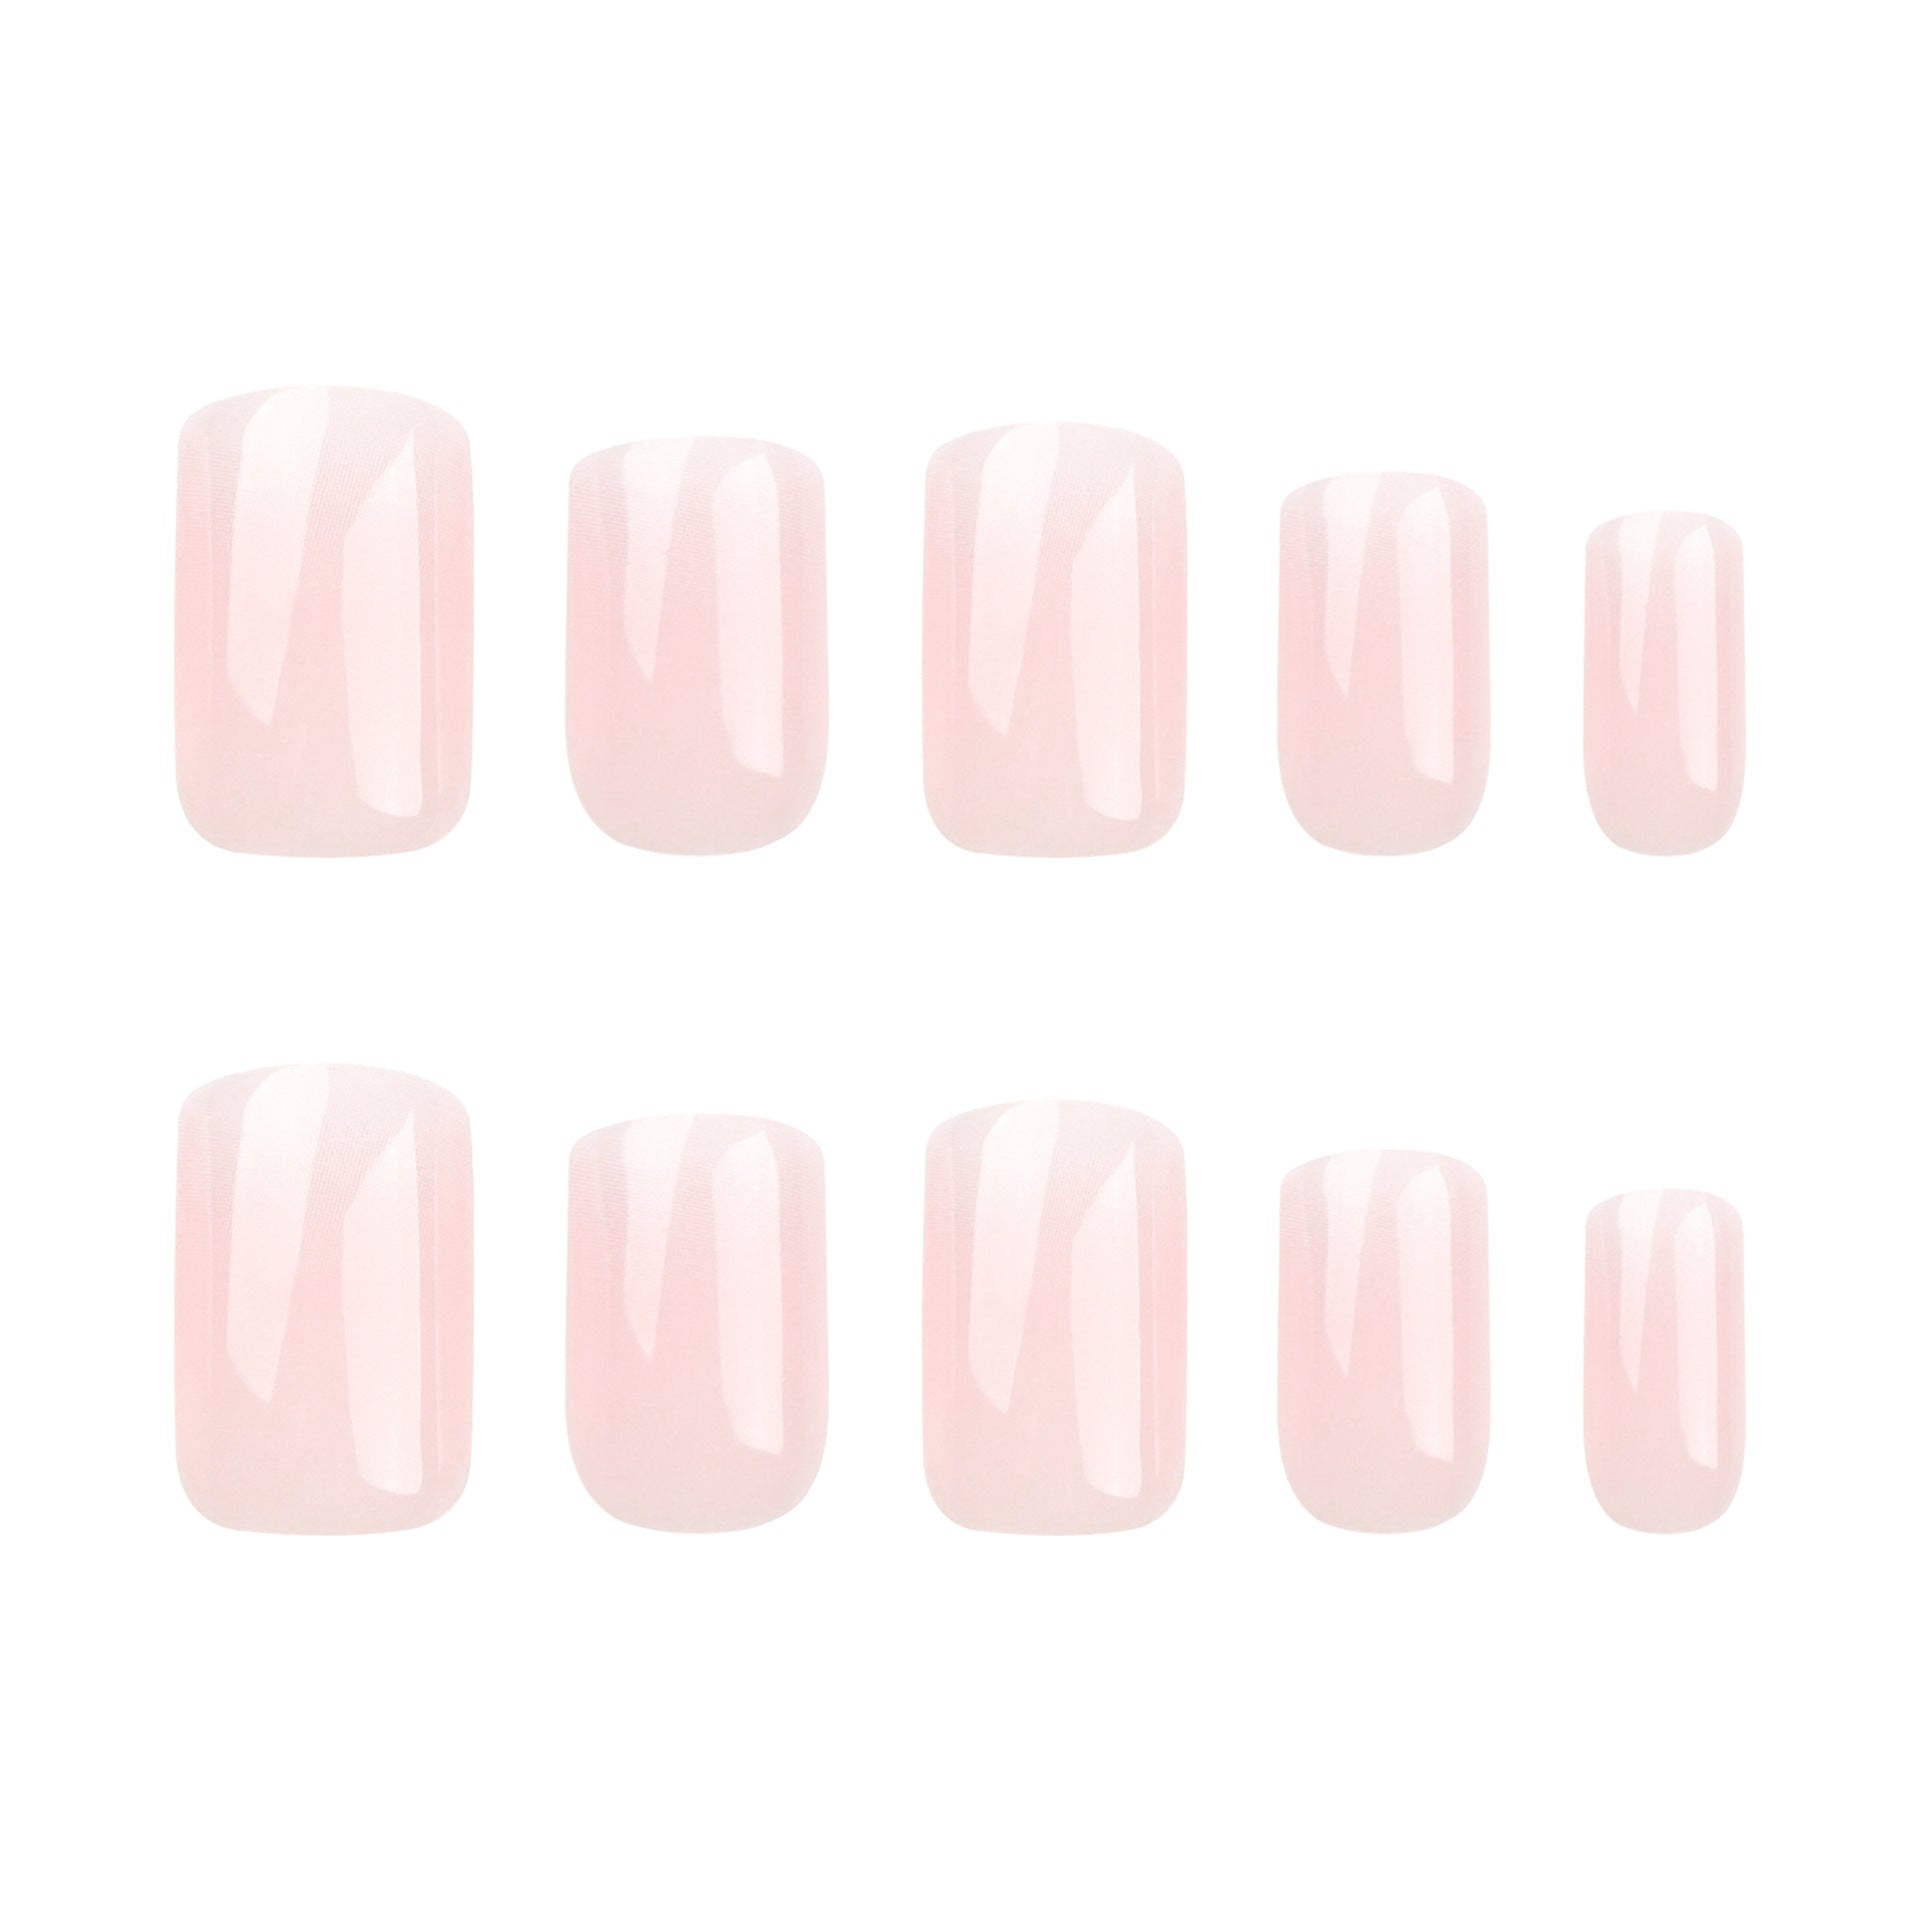 FRENCH GRADIENT | PINK & WHITE | GENTLE FRENCH | SHORT NAILS | 24NAILS-TAGLESSNAILS